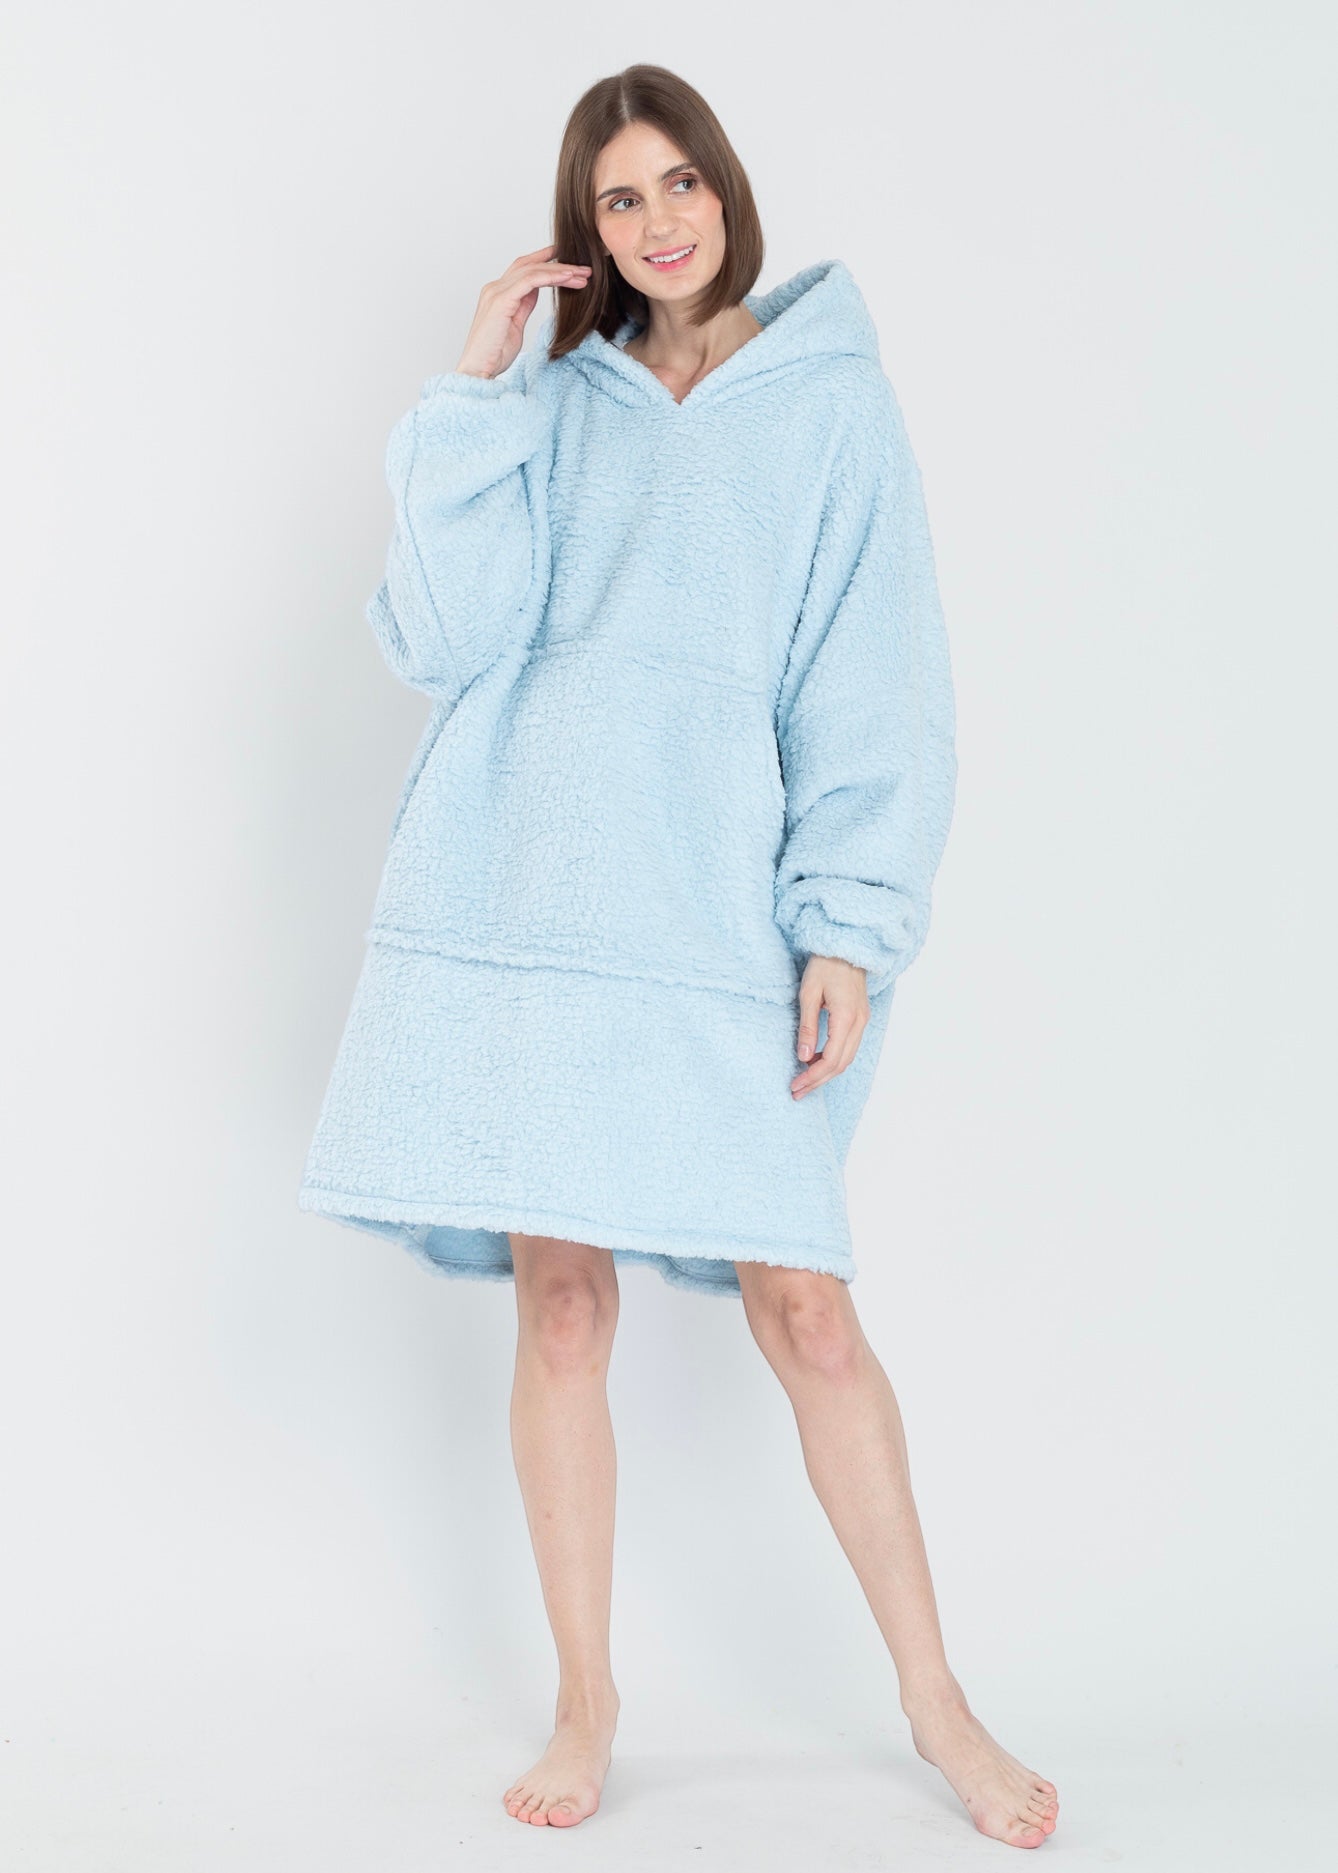 Bubble Gum Blue Cloudie® Original - The Cloudie Co. ultra soft cosy comfy Giant Wearable Blanket hoodie Unisex home or travel blanket hoodie travel blanket sofa blanket with sleeves hoodie blanket